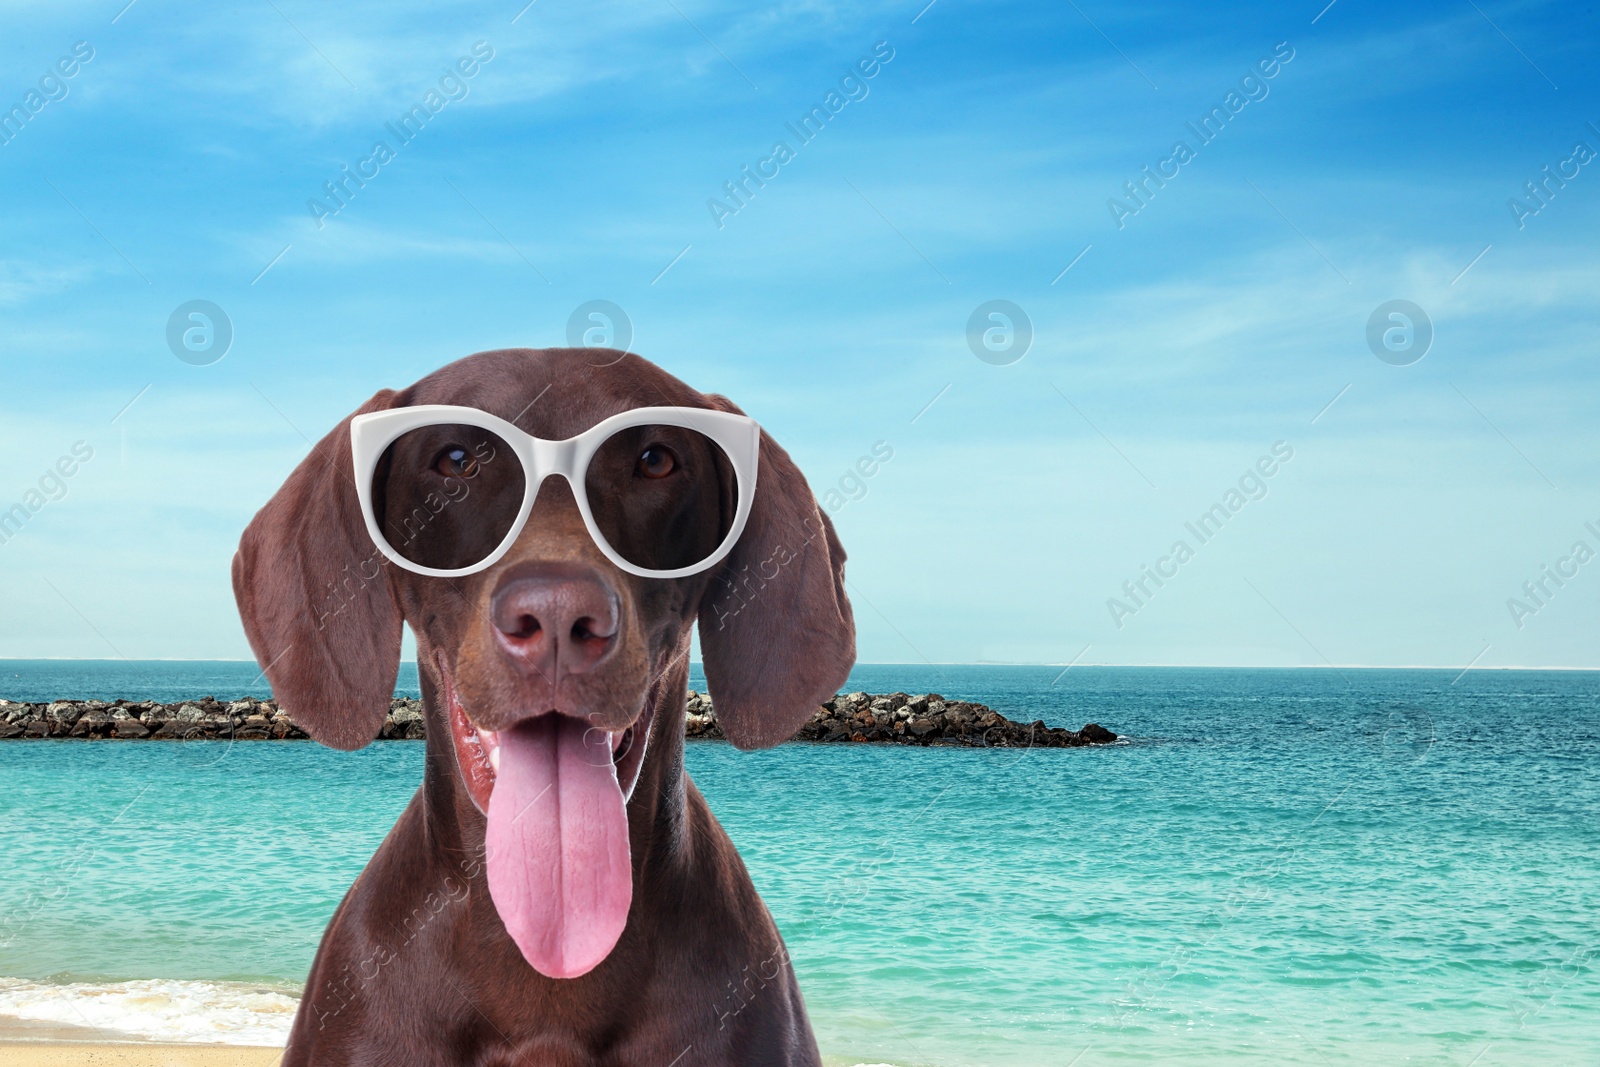 Image of German Shorthaired Pointer dog with sunglasses on sunny beach